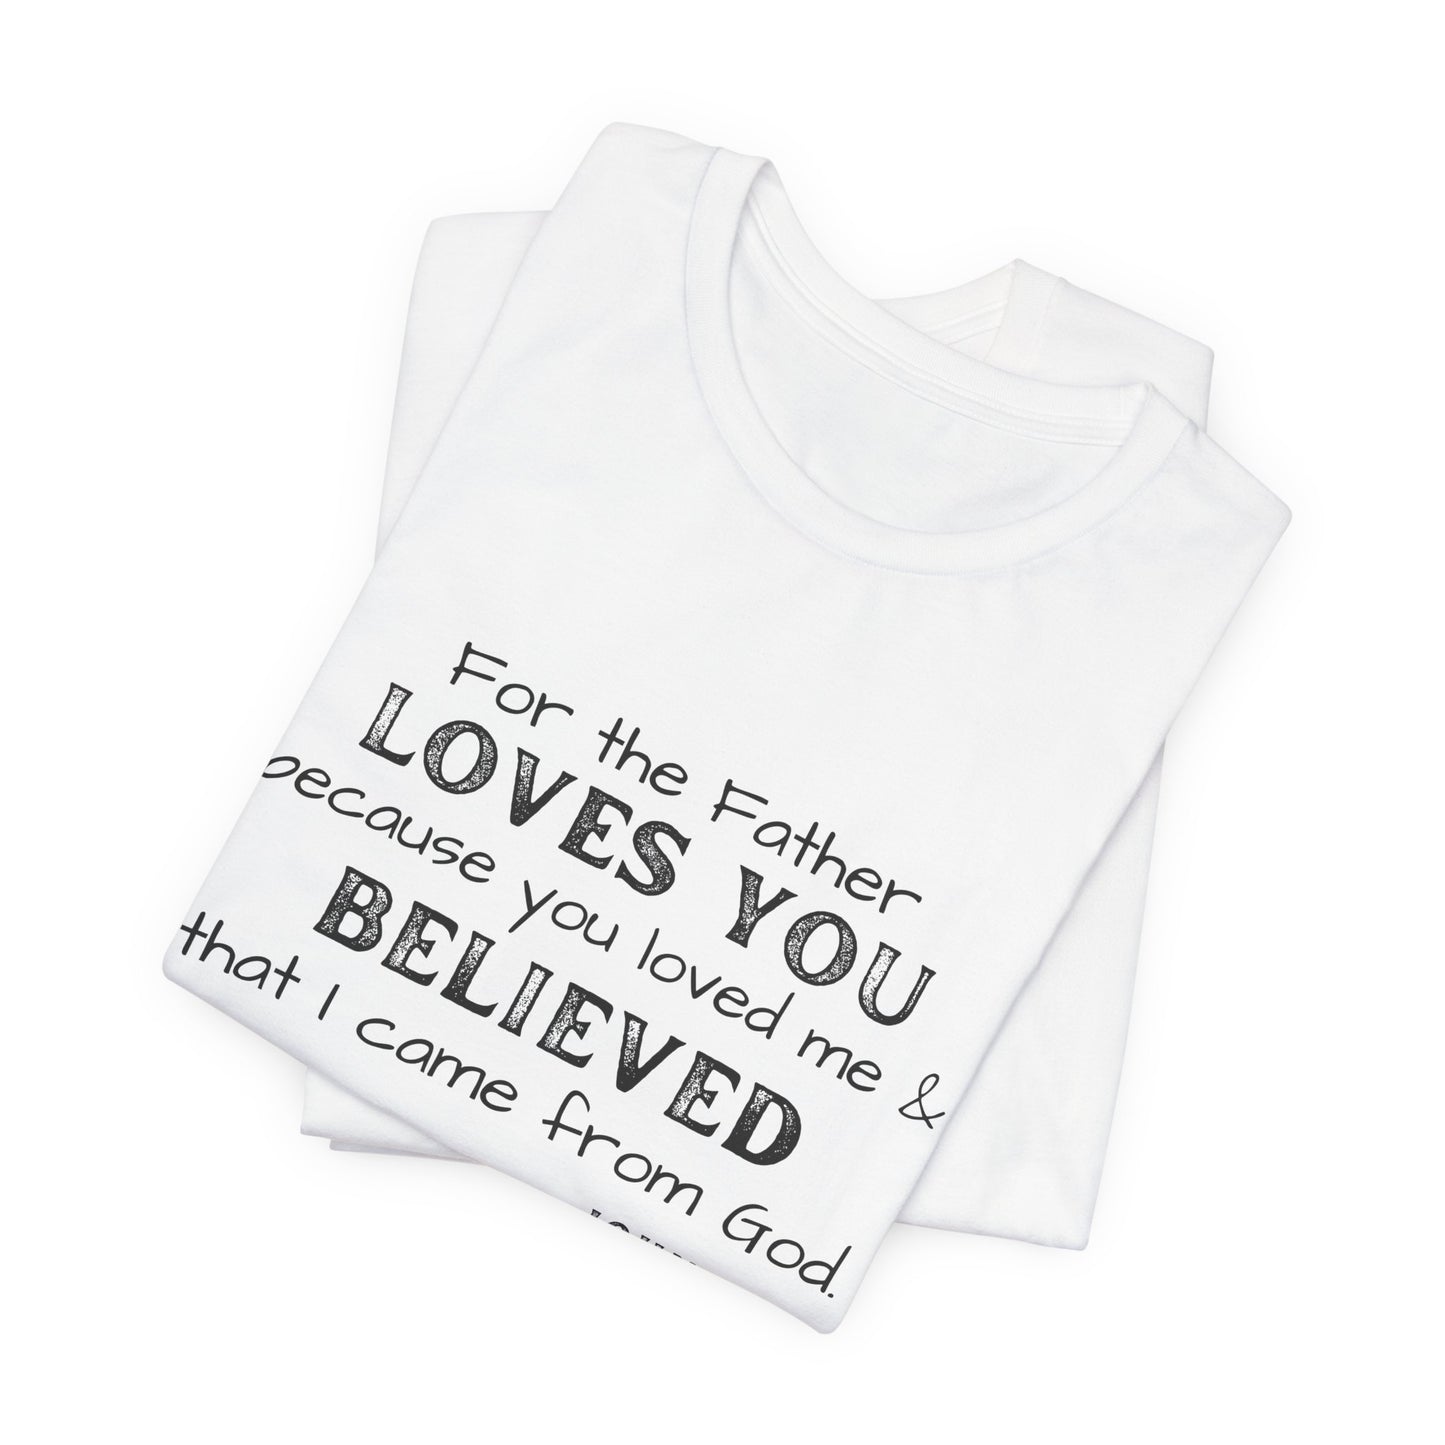 John 16.27 The Father loves You, T-shirt for Men and Women